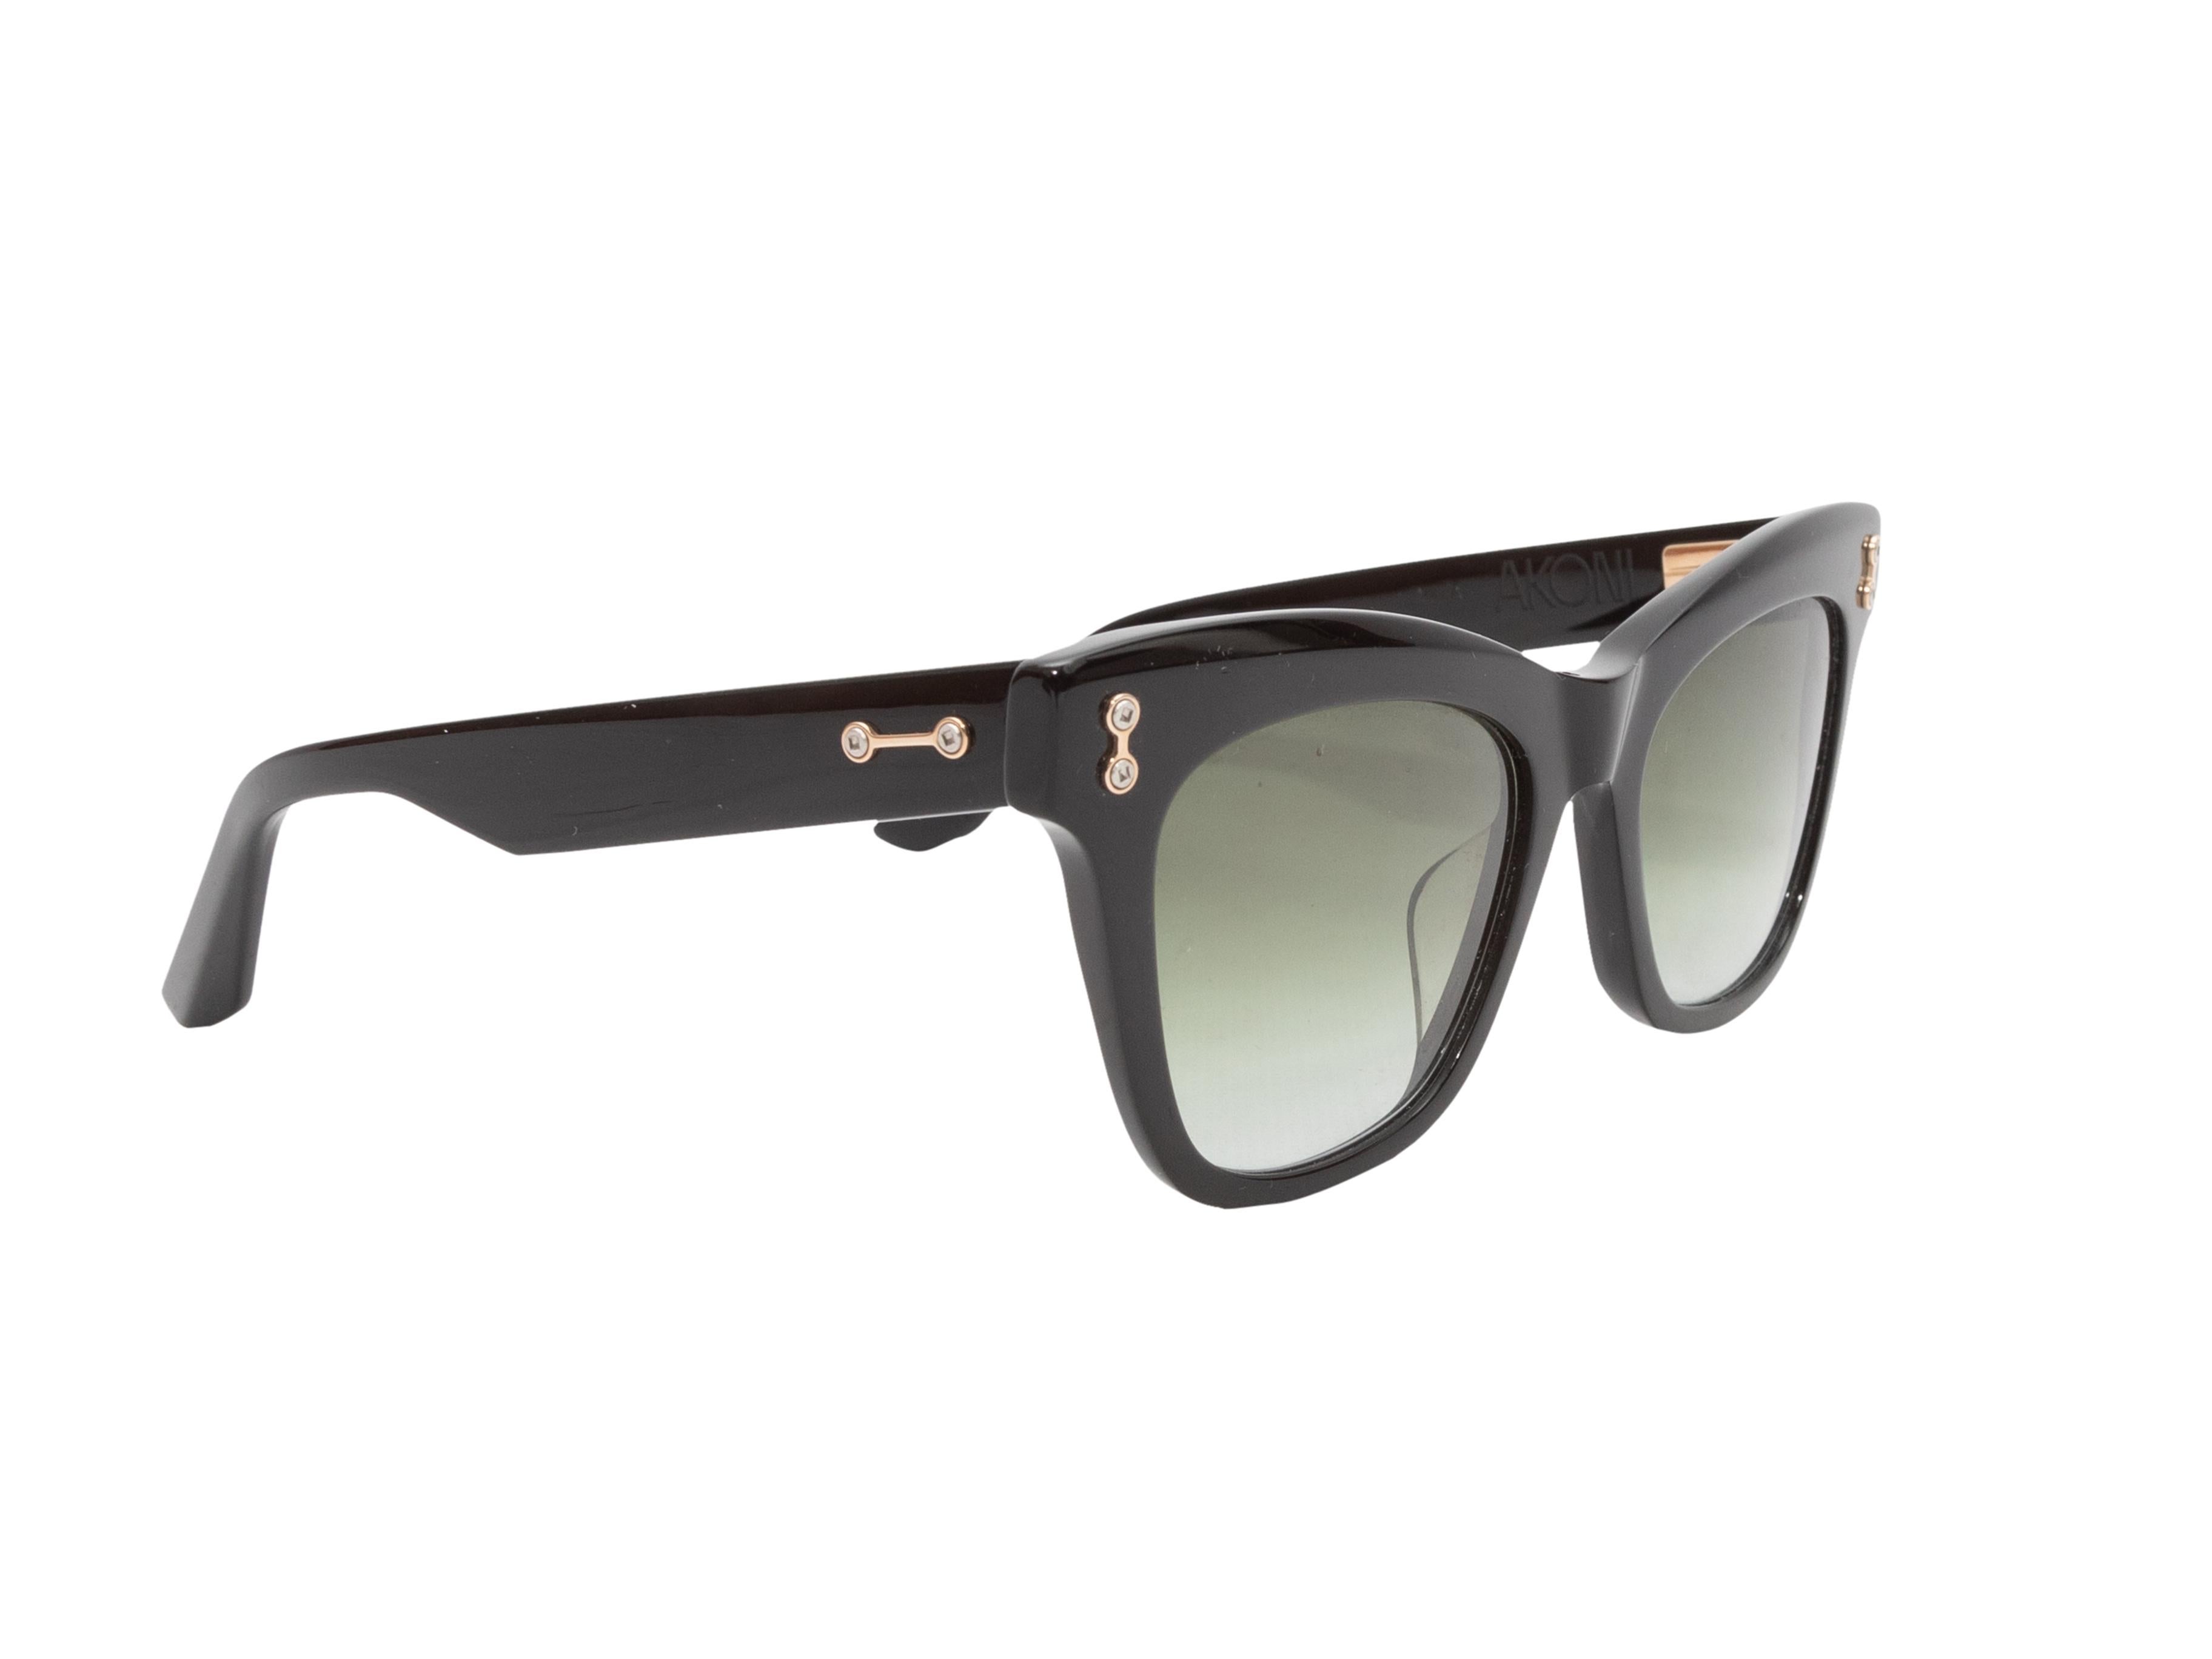 Black Akoni Wayfarer Sunglasses In Excellent Condition For Sale In New York, NY